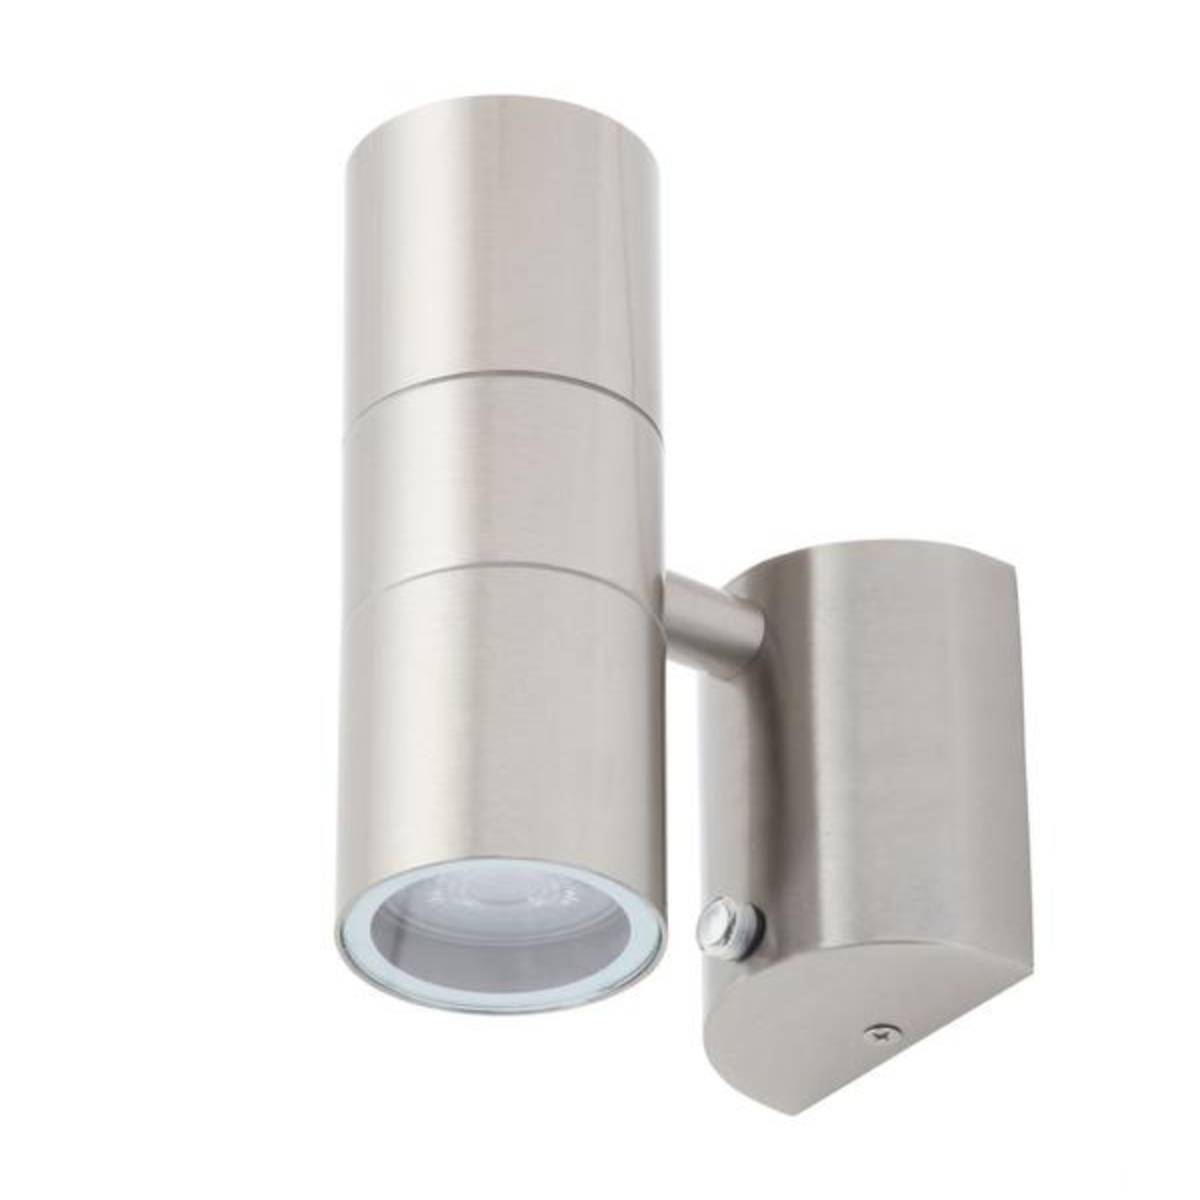 Forum Zinc ZN-34022-SST Leto Twin Up/Down Wall Light with Photocell - Stainless Steel (12004)